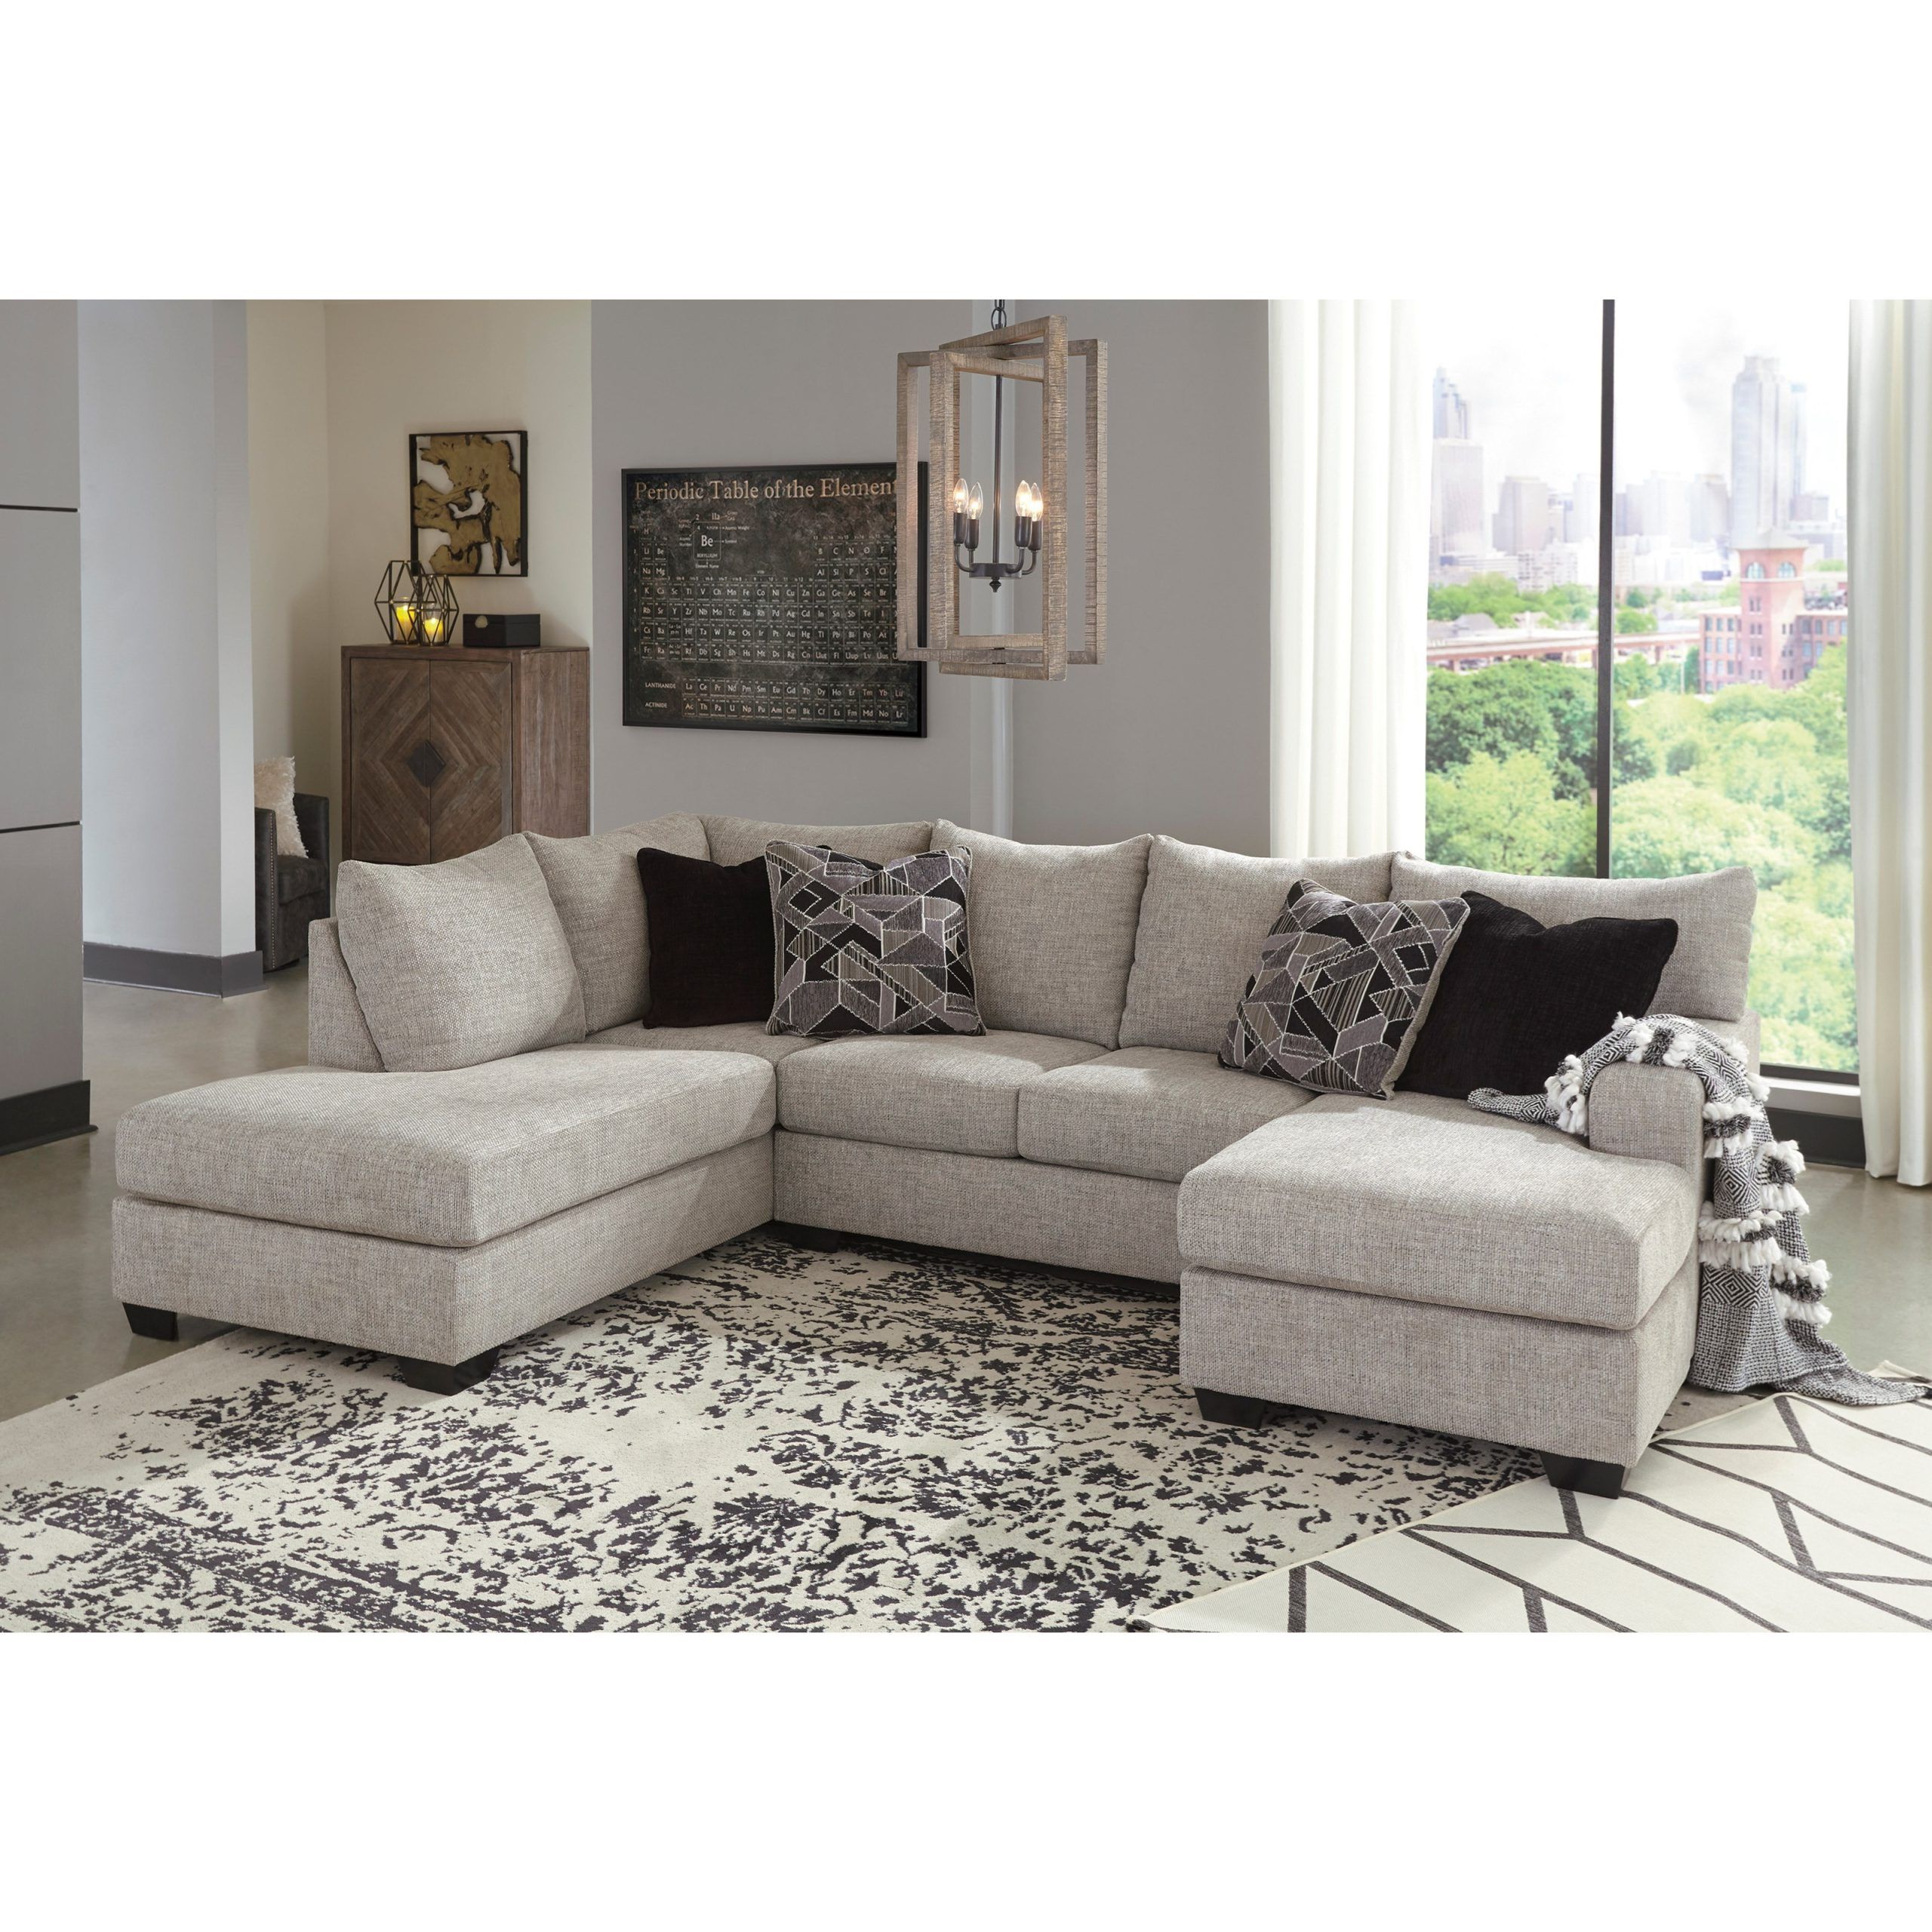 U Shaped Sectional With Two Chaises | Sadler's Home Furnishings Within Modern U Shape Sectional Sofas In Gray (View 19 of 20)